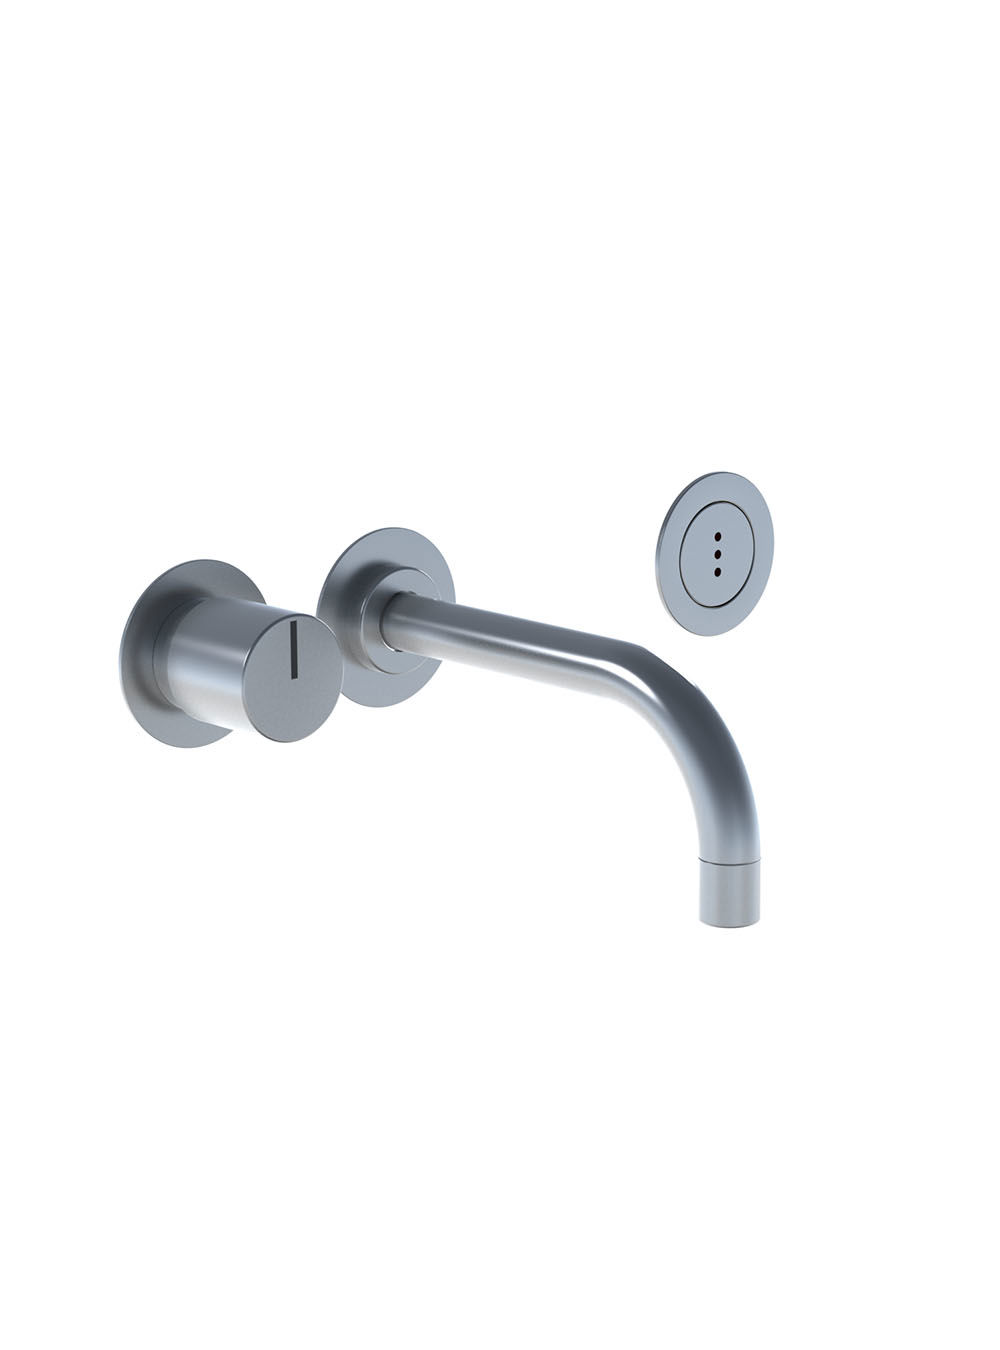 4911: Build-in basin mixer with on-off sensor for ‘hands free’ operation. Sensor aligned with wall. Valve 